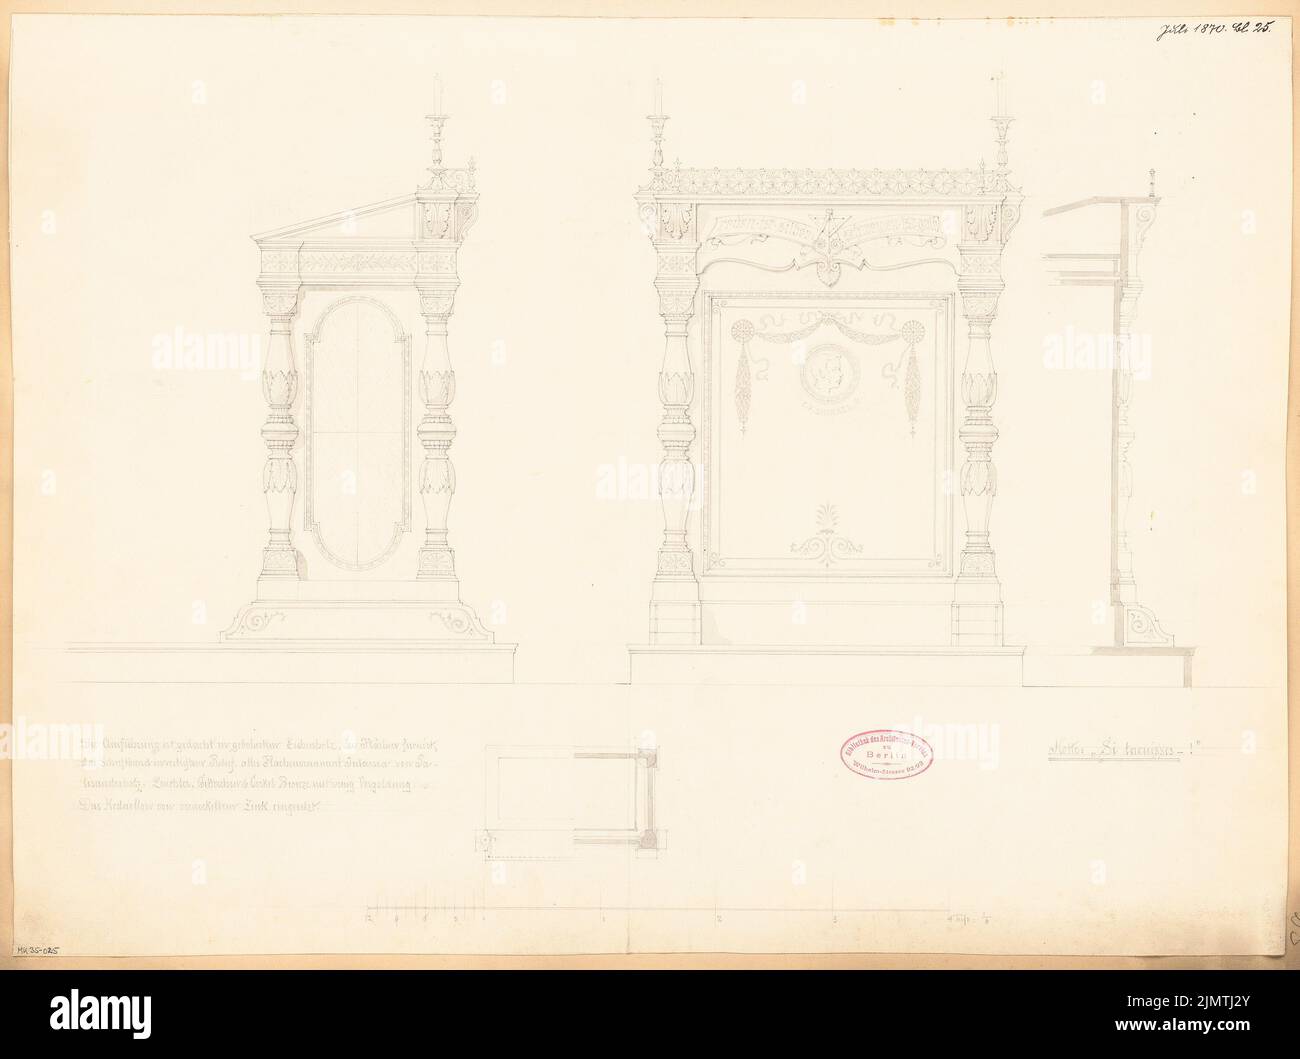 Unknown architect, lectern for the architect association. Monthly competition in July 1870 (07.1870): floor plan, ancestry front view, side view, vertical cut; Scale bar, explanatory text. Ink on paper, 43.2 x 57.9 cm (including scan edges) N.N. : Rednerpult für den Architekten-Verein. Monatskonkurrenz Juli 1870 Stock Photo